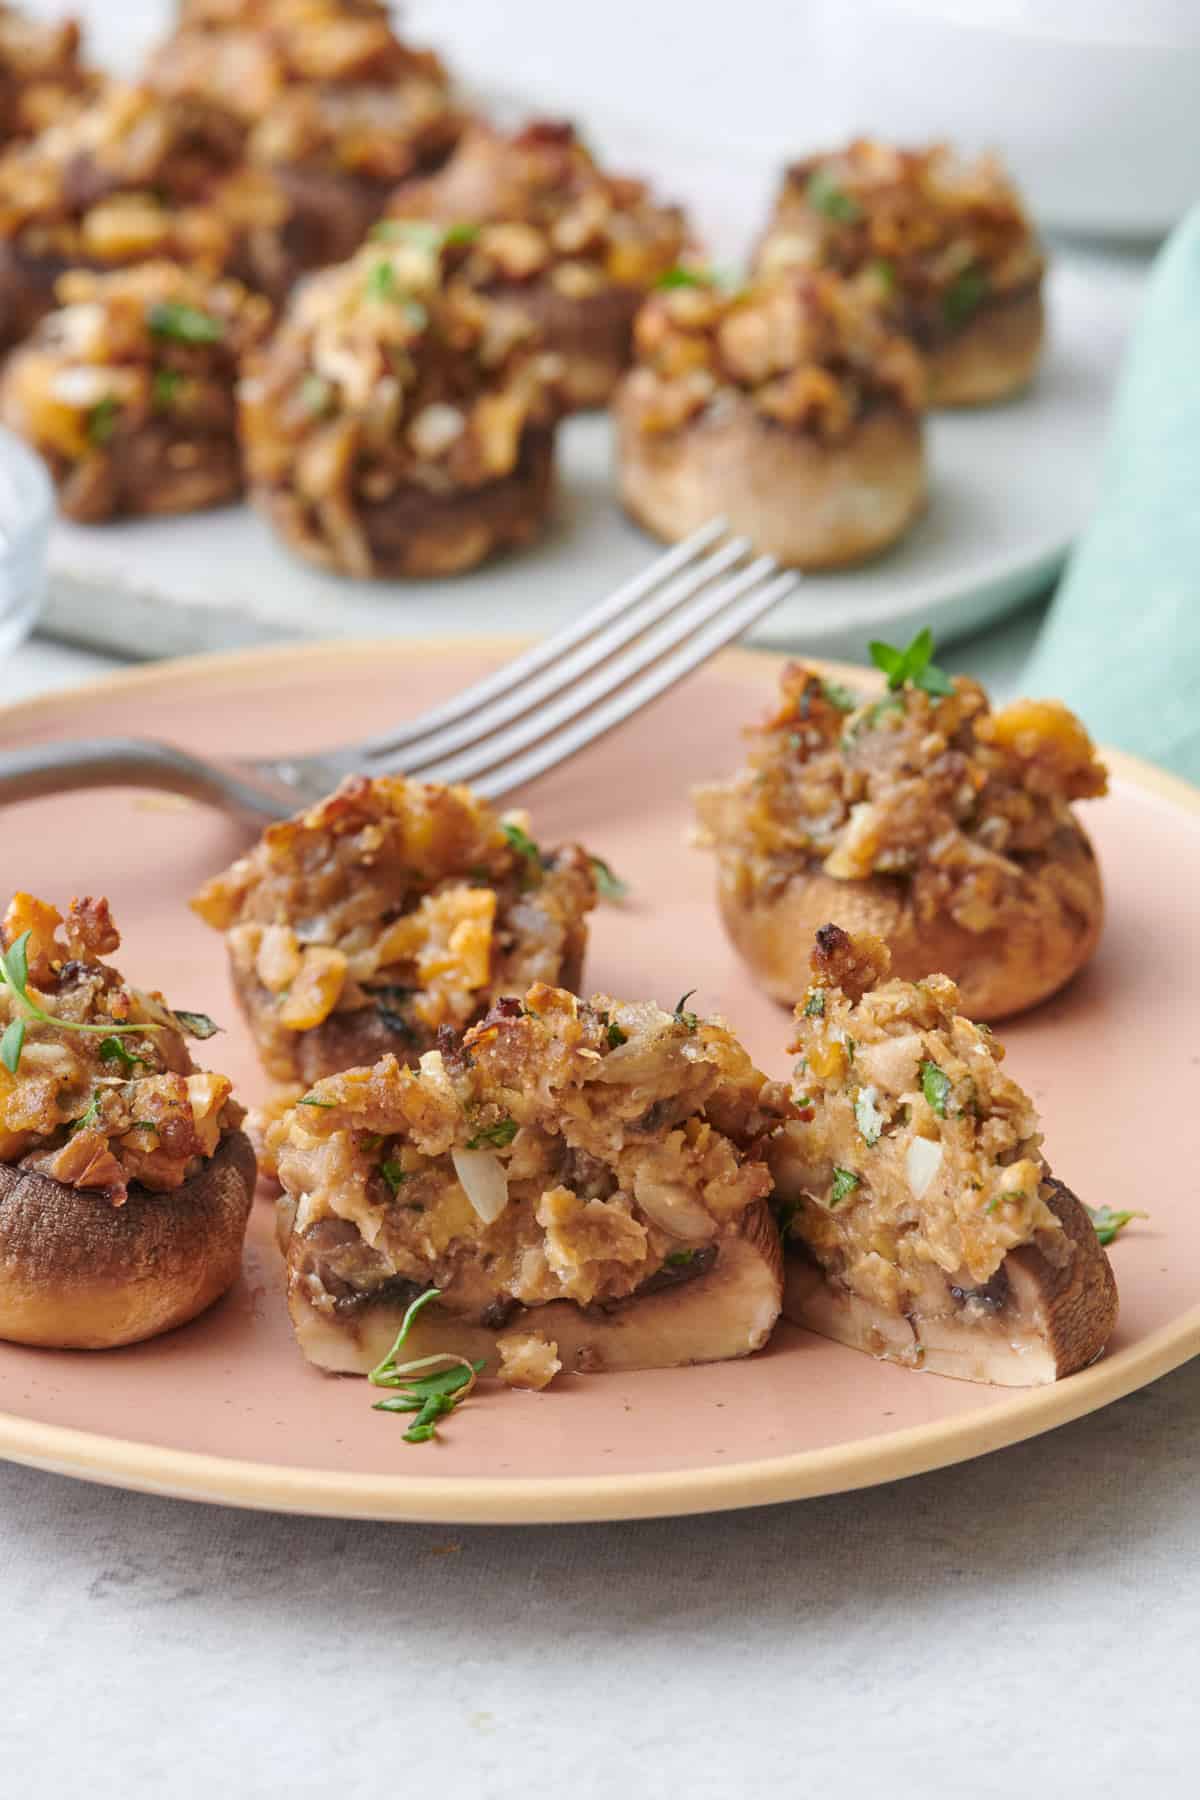 Vegetarian stuffed mushrooms on a dish garnished with rosemary